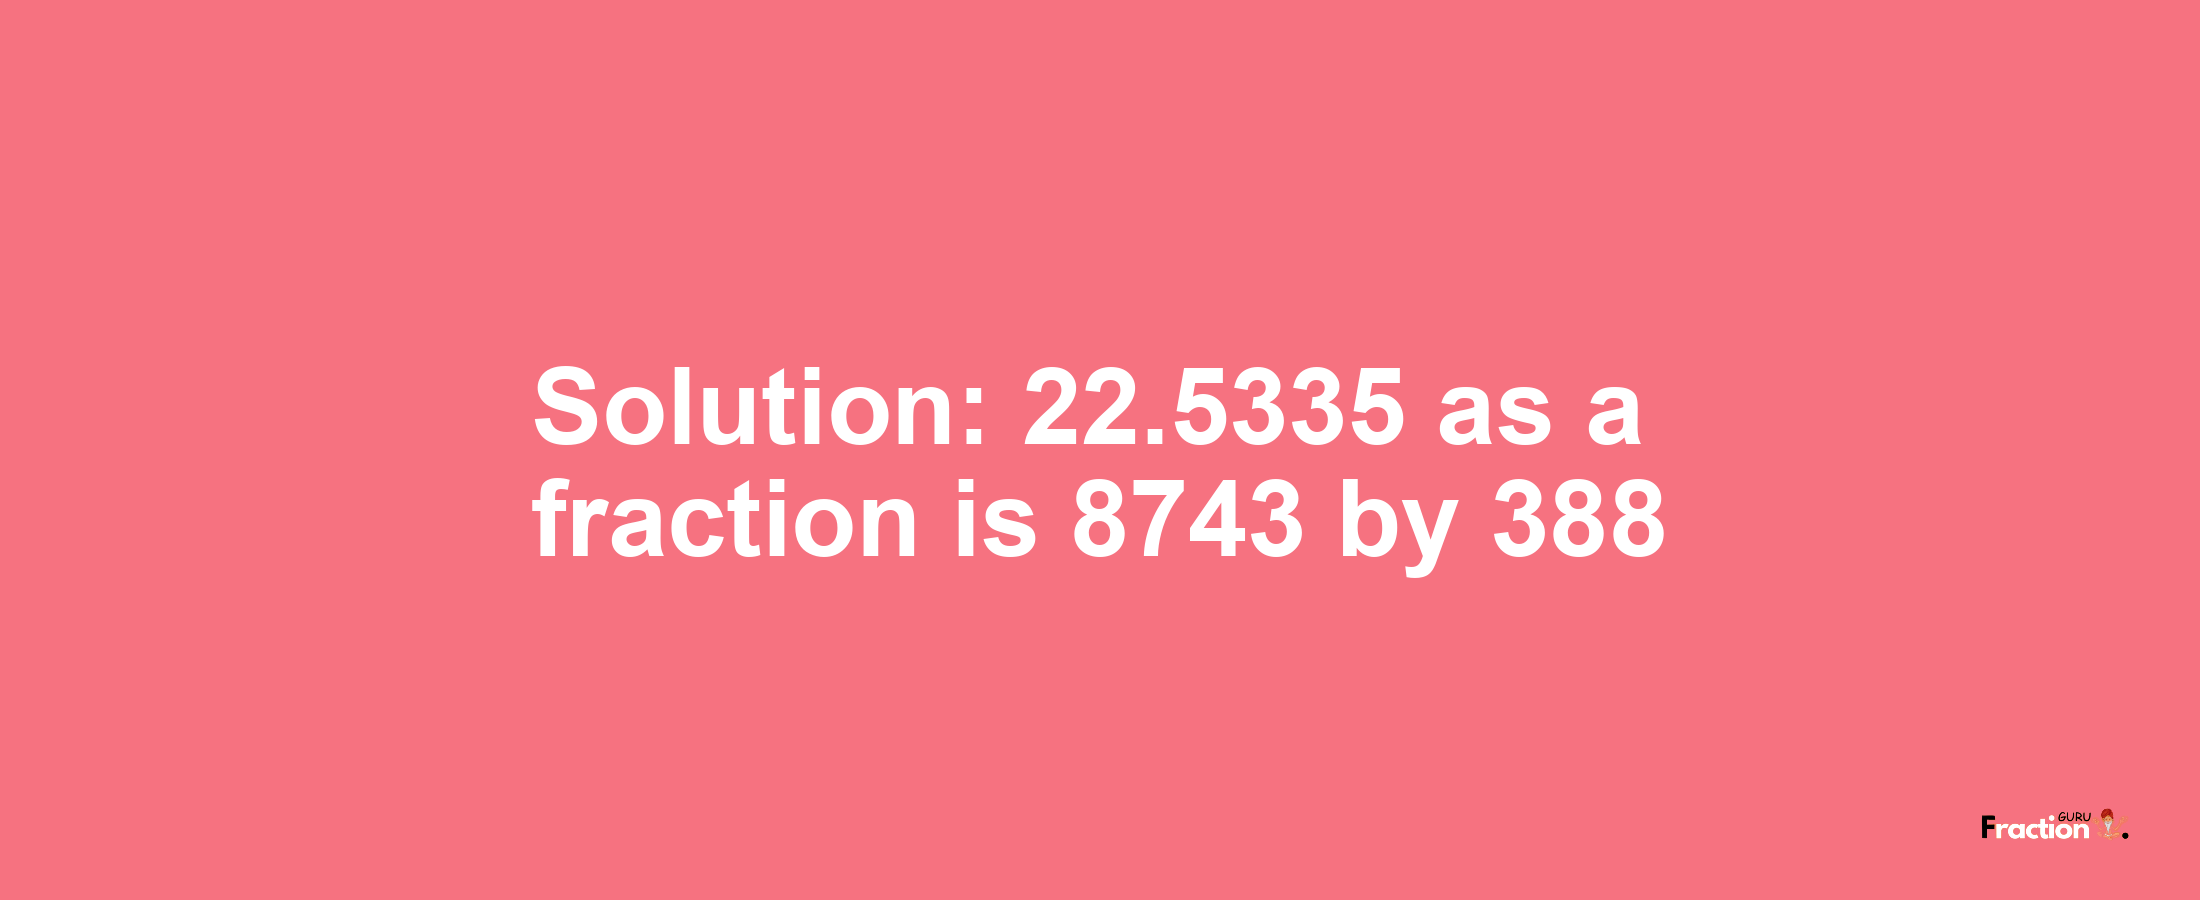 Solution:22.5335 as a fraction is 8743/388